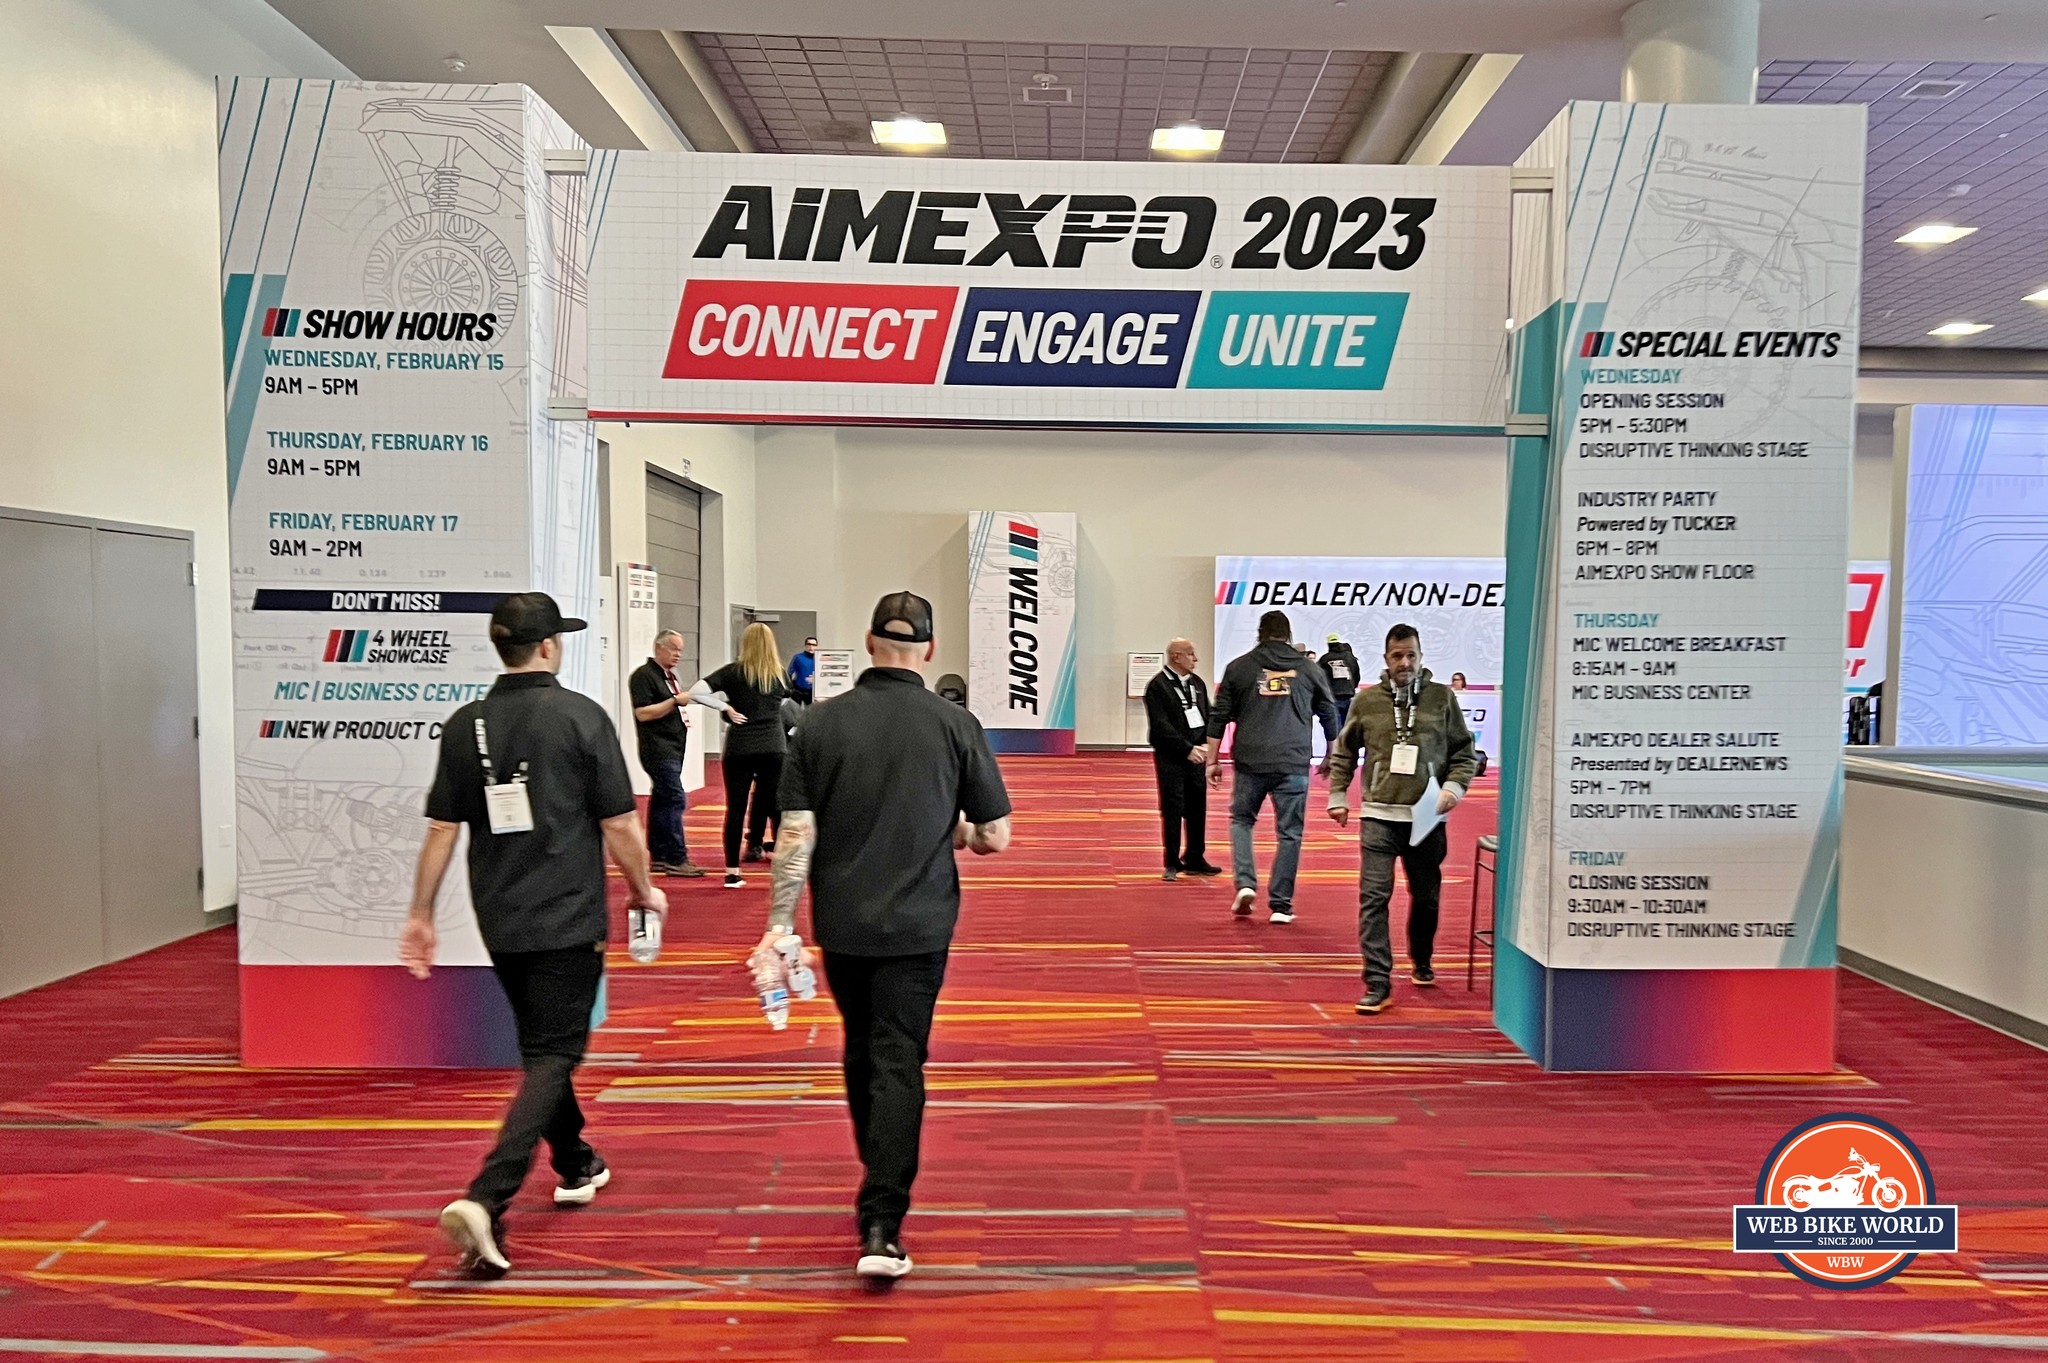 The welcome arch in the LVCC for AimExpo 2023.